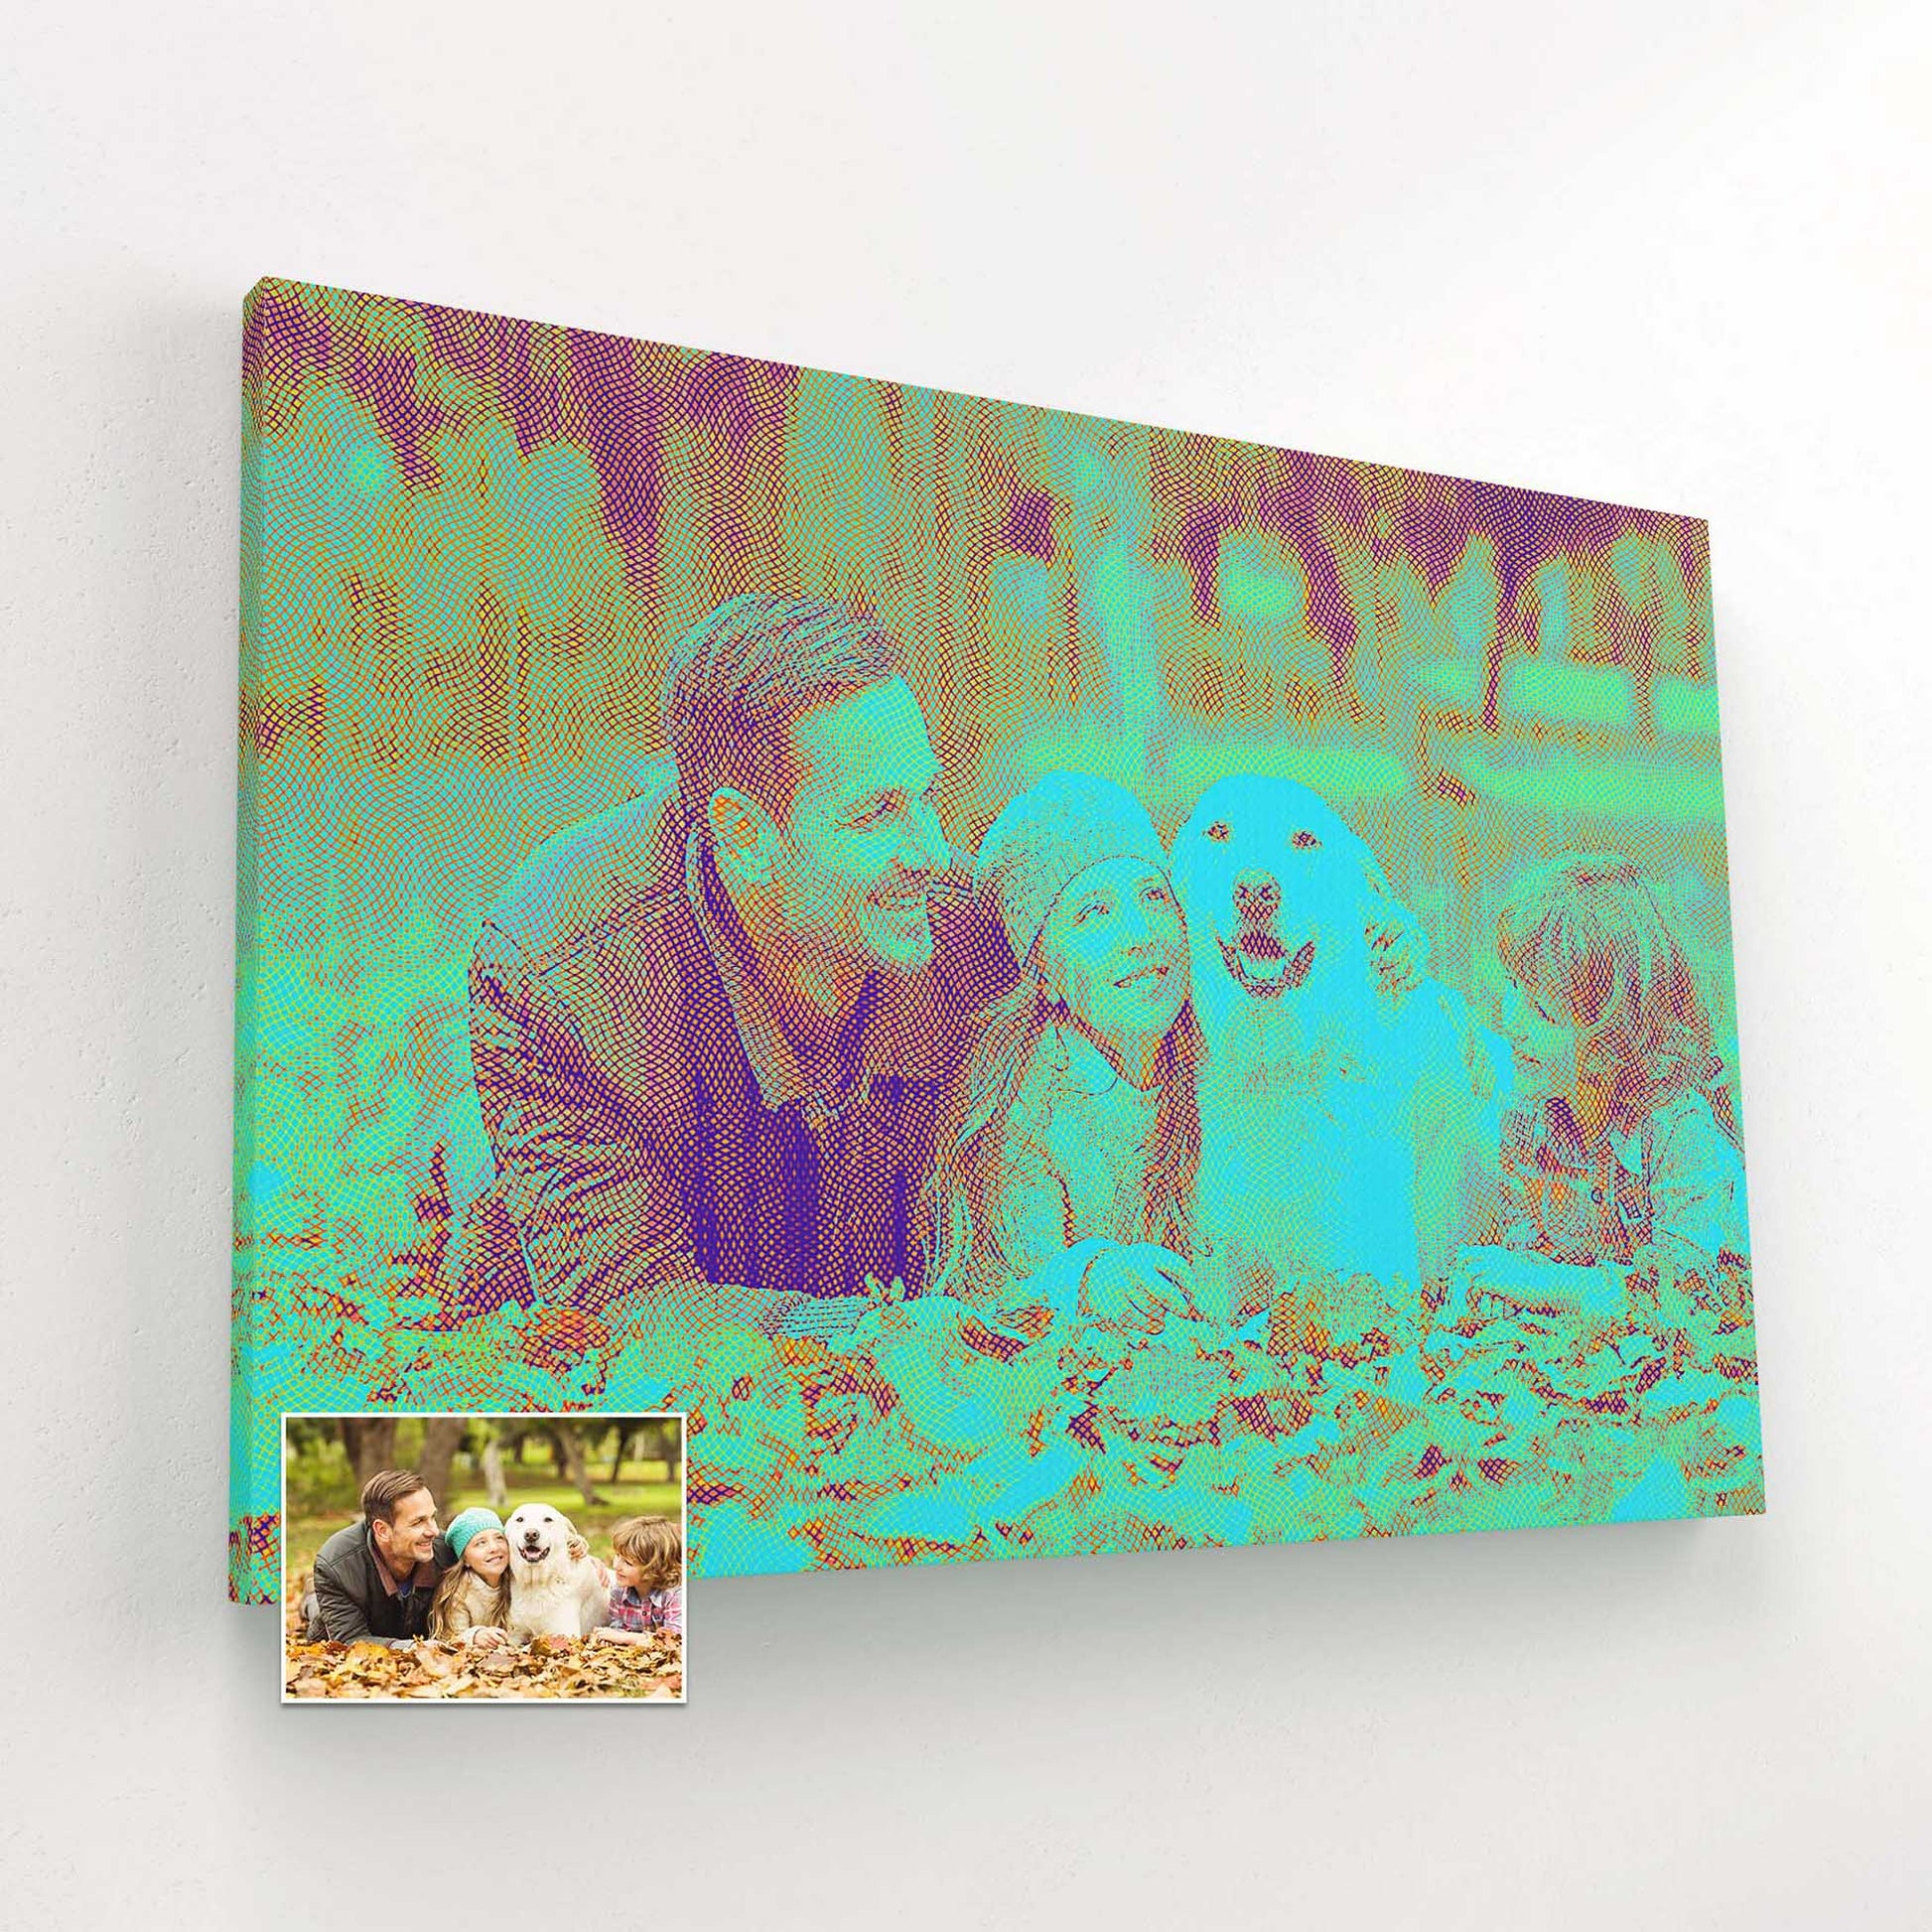 Transform your treasured photo into a work of art with our Blue Engraved Canvas. This unique and custom-made piece captures the essence of your memories with its fun and cool design. The fresh and vibrant blue colors add a modern touch